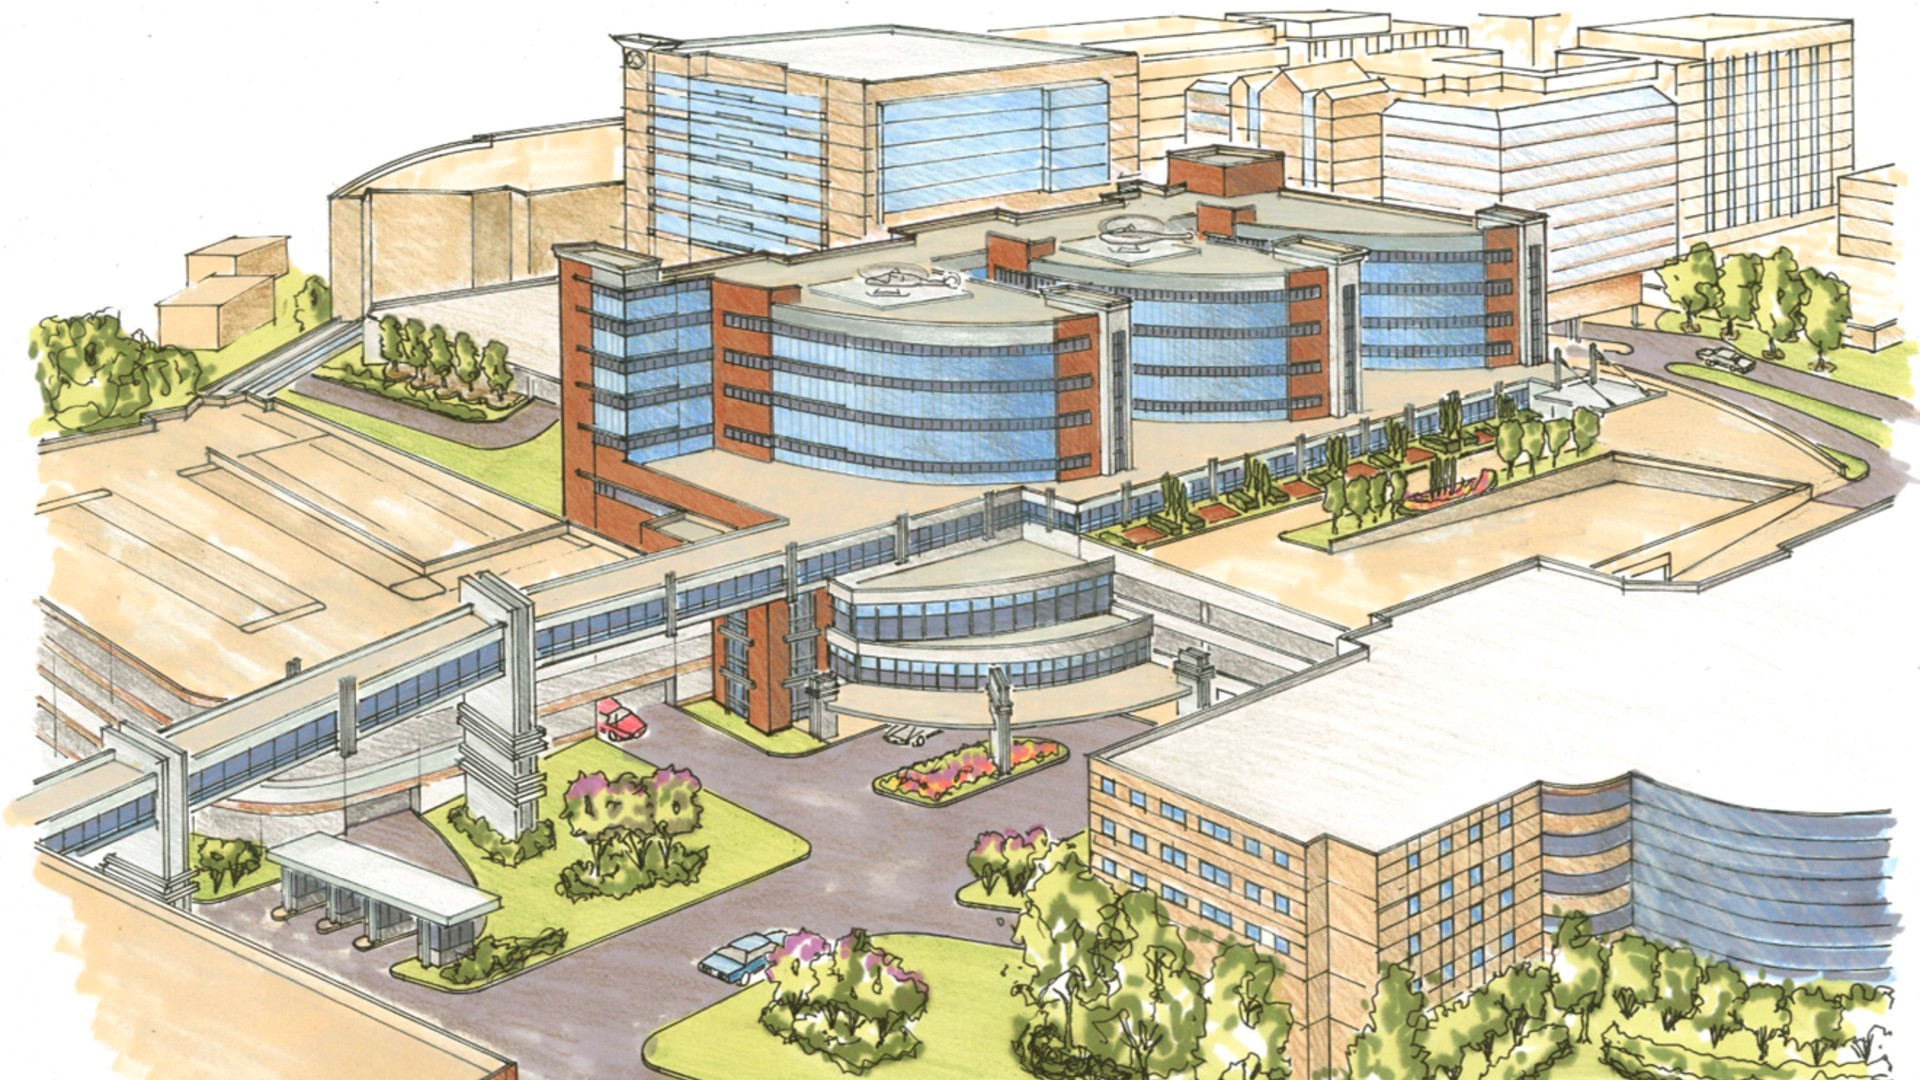 A rendering of a new care tower at Wake Forest Baptist Medical Center which represents expanded access to critical services to the Winston-Salem community.